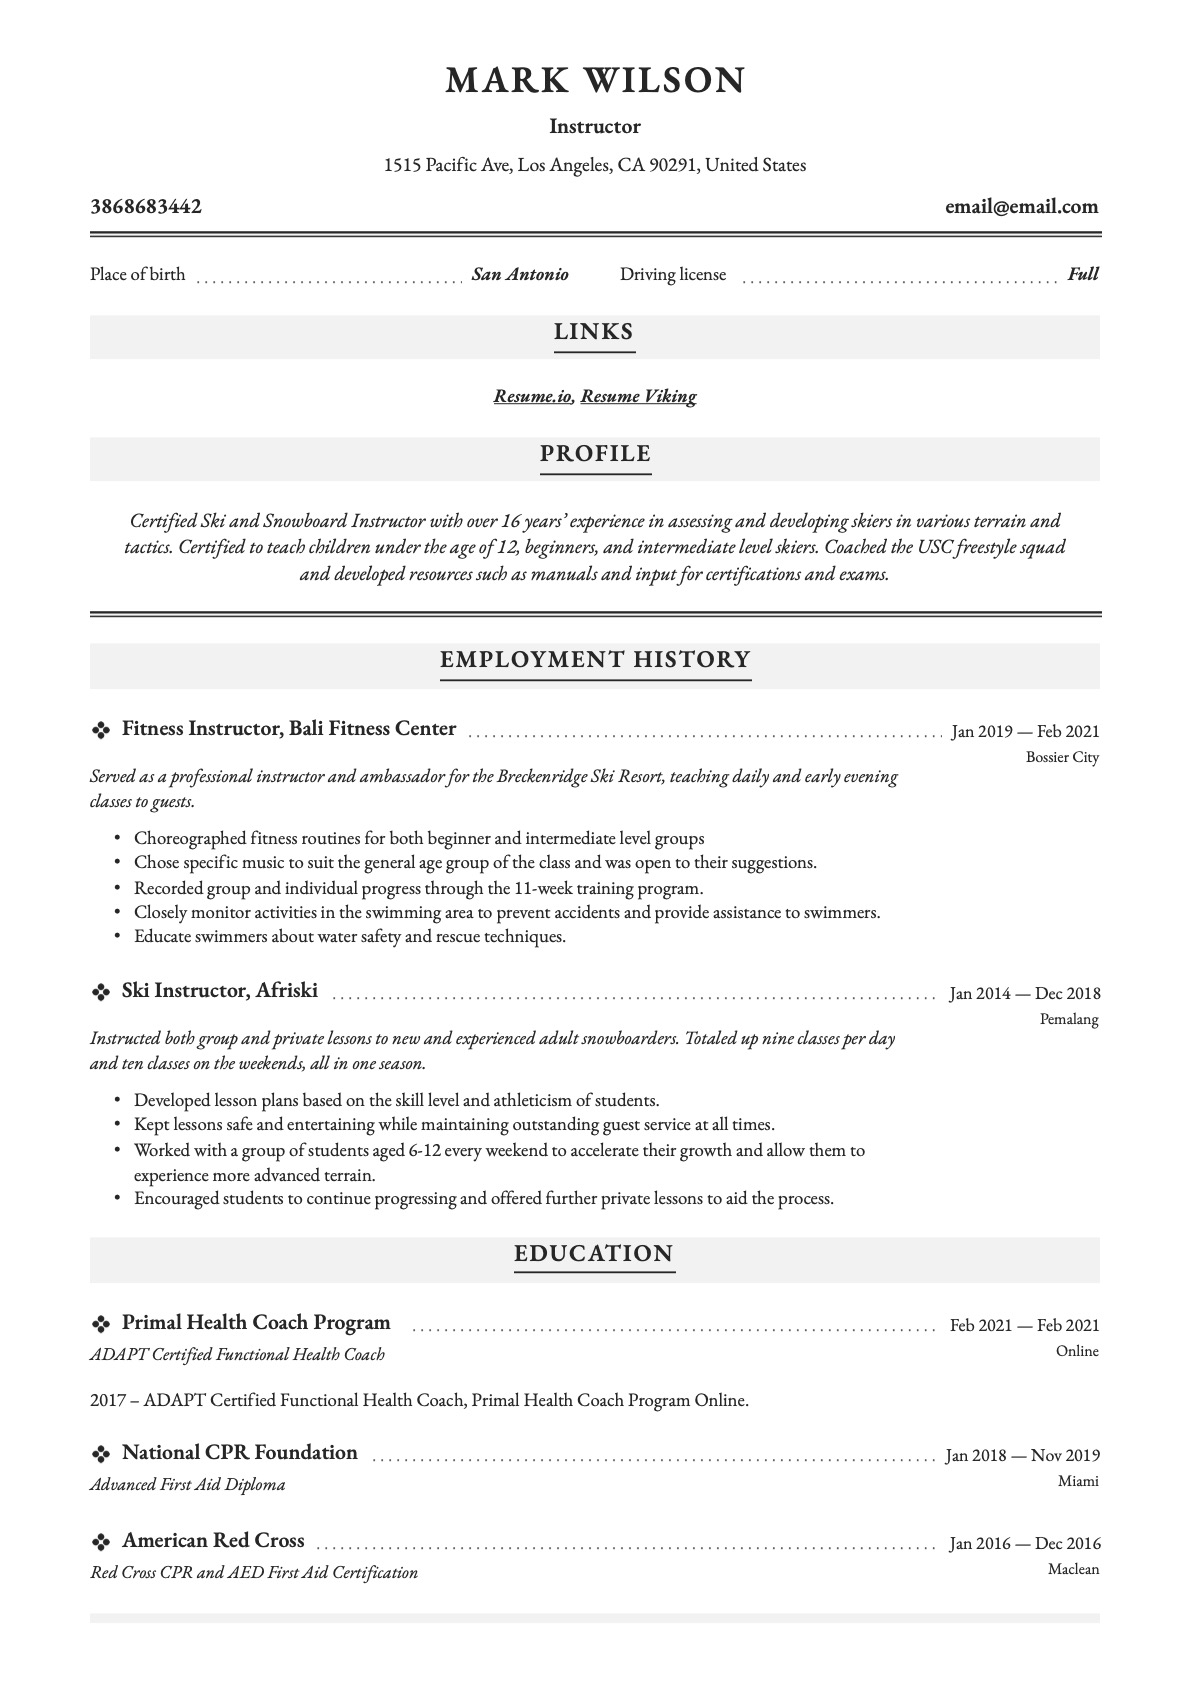 Example Resume Instructor-10